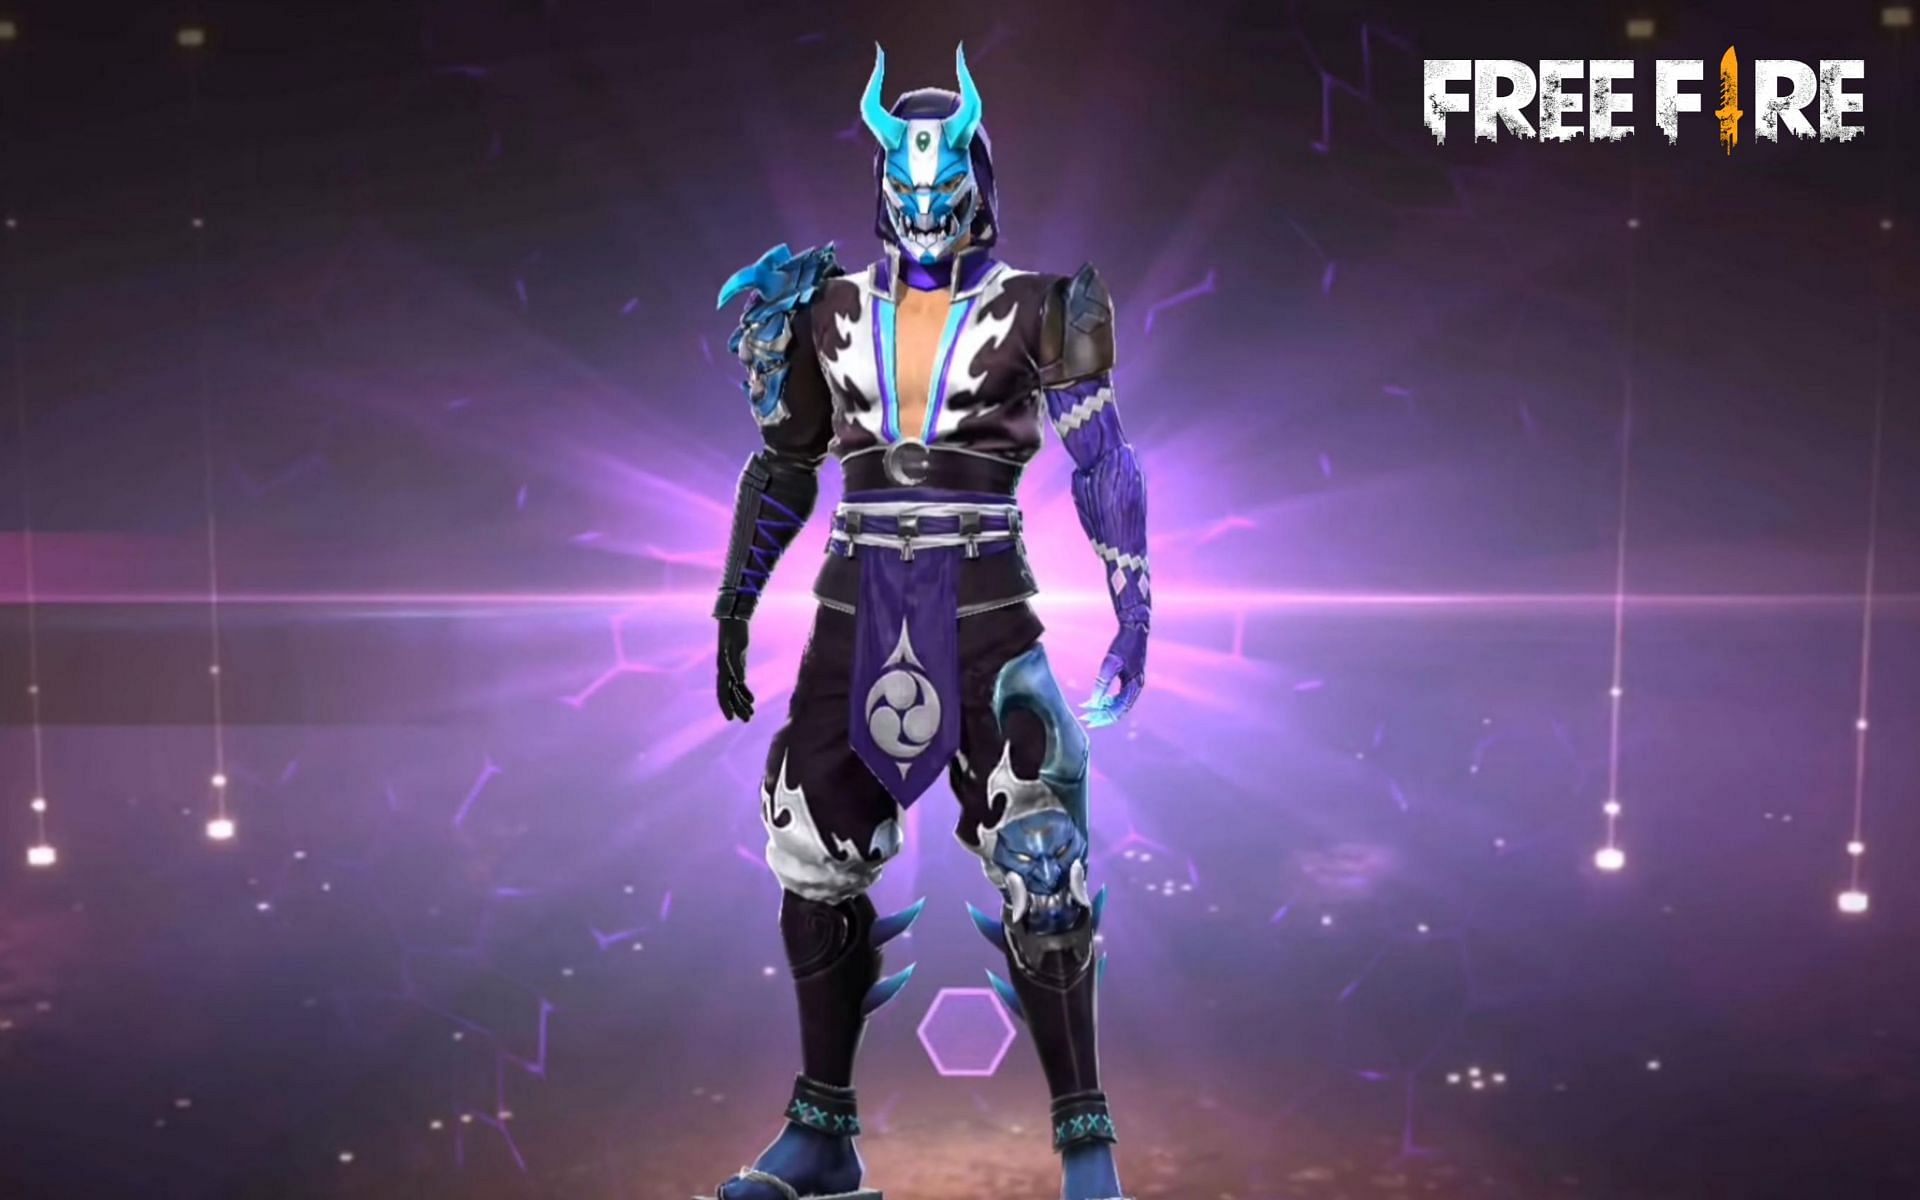 Frosted Samurai is one of the most exclusive costume bundles in Free Fire (Image via Free Fire)